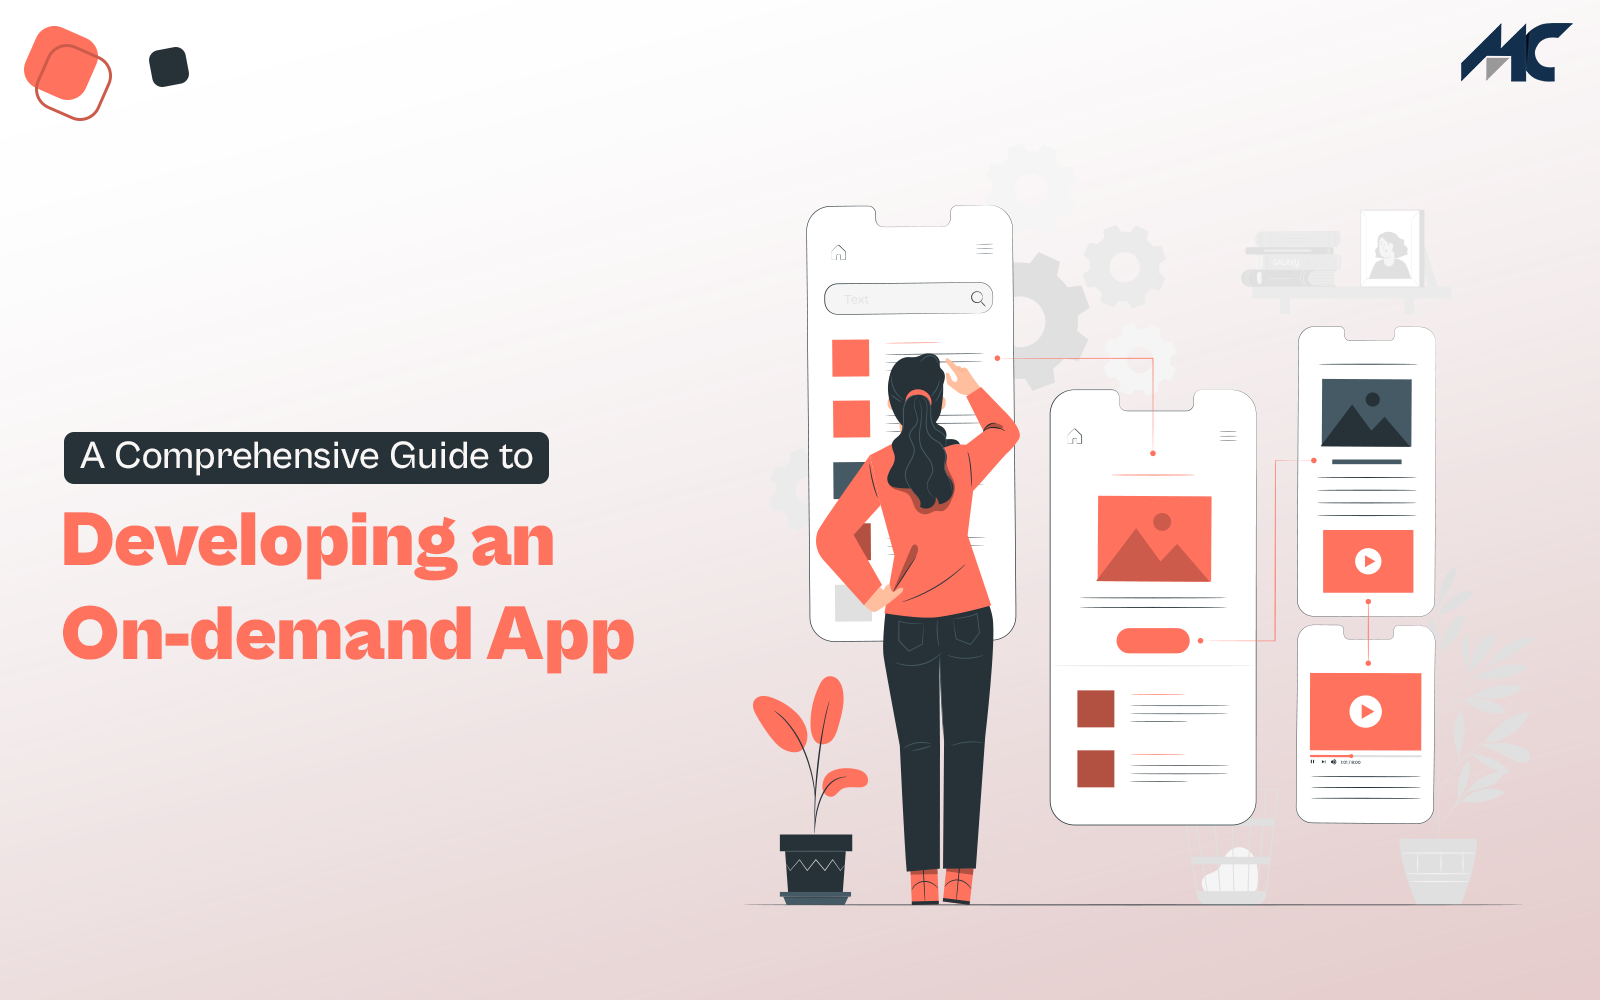 A Comprehensive Guide to Developing an On-demand App